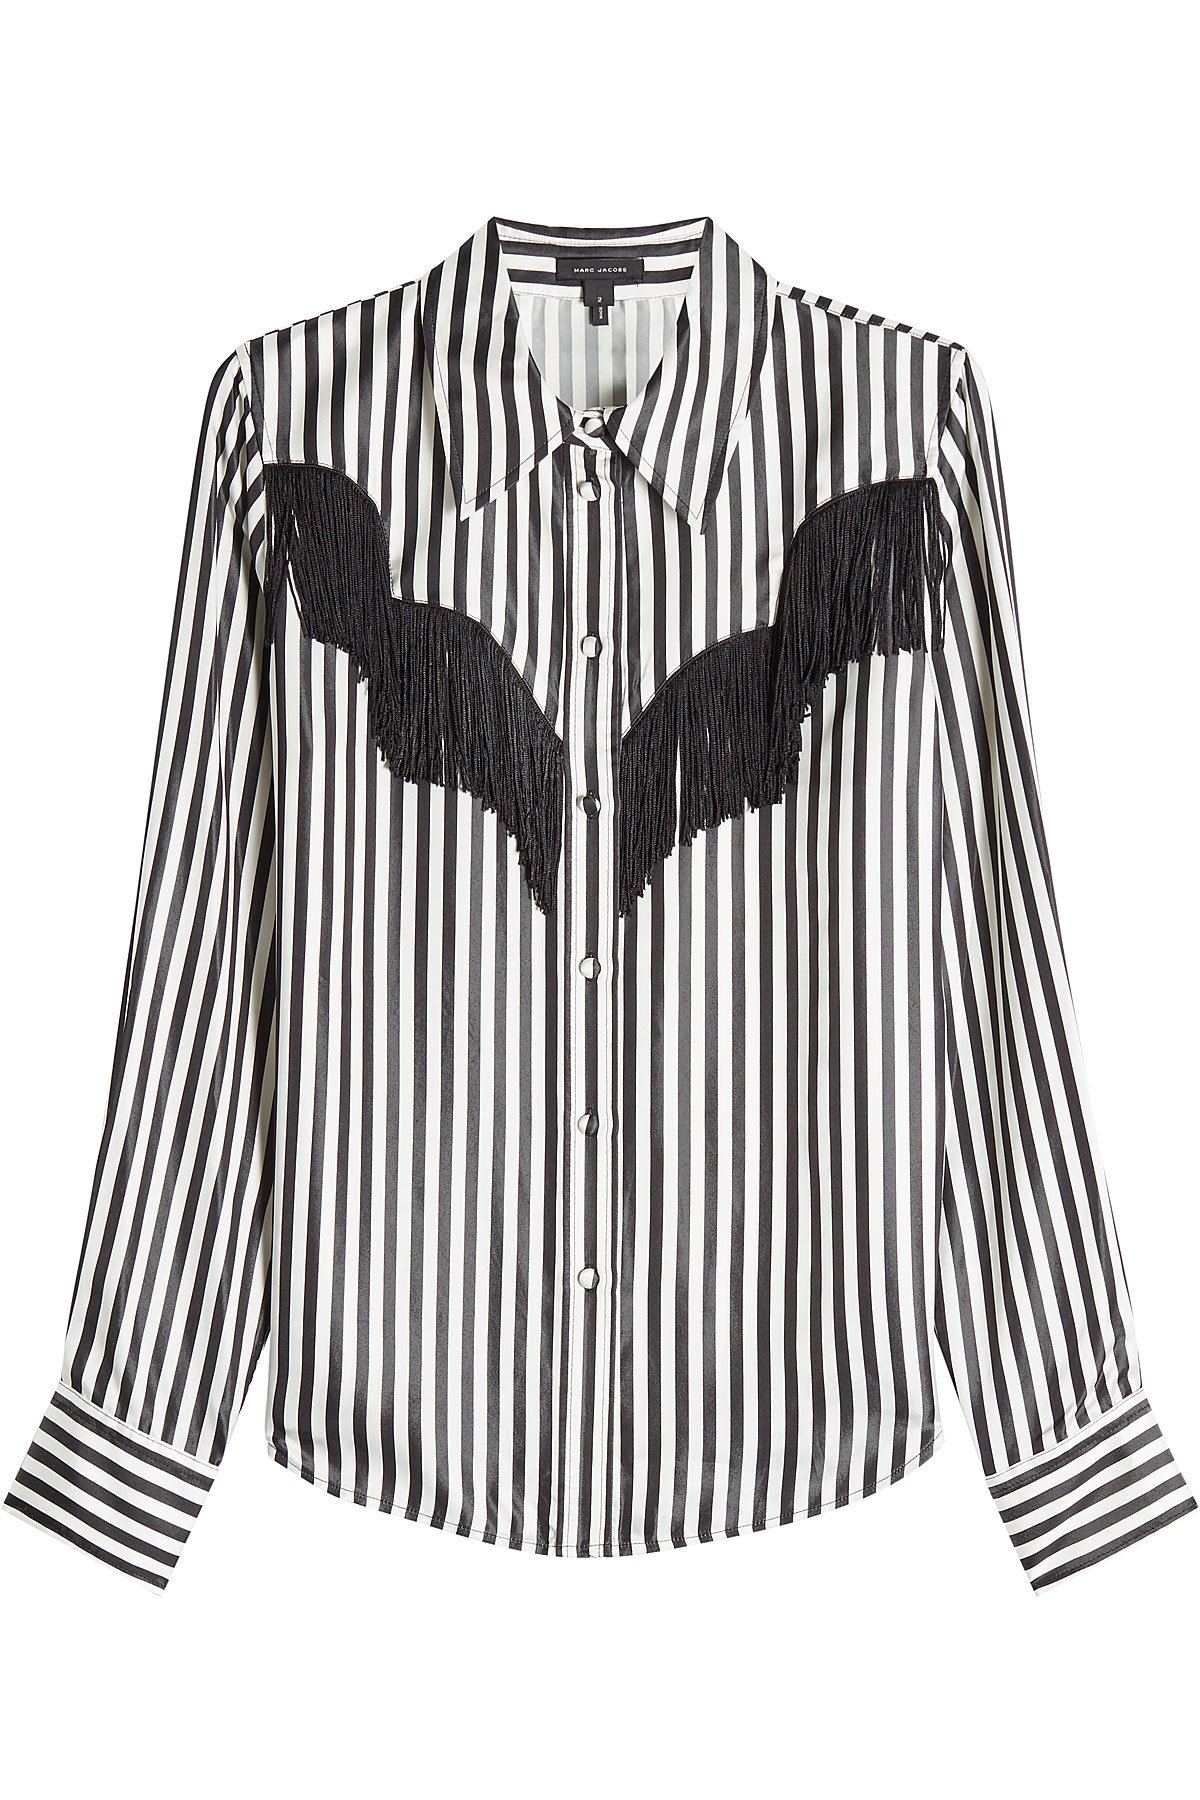 Marc Jacobs - Striped Shirt with Fringing